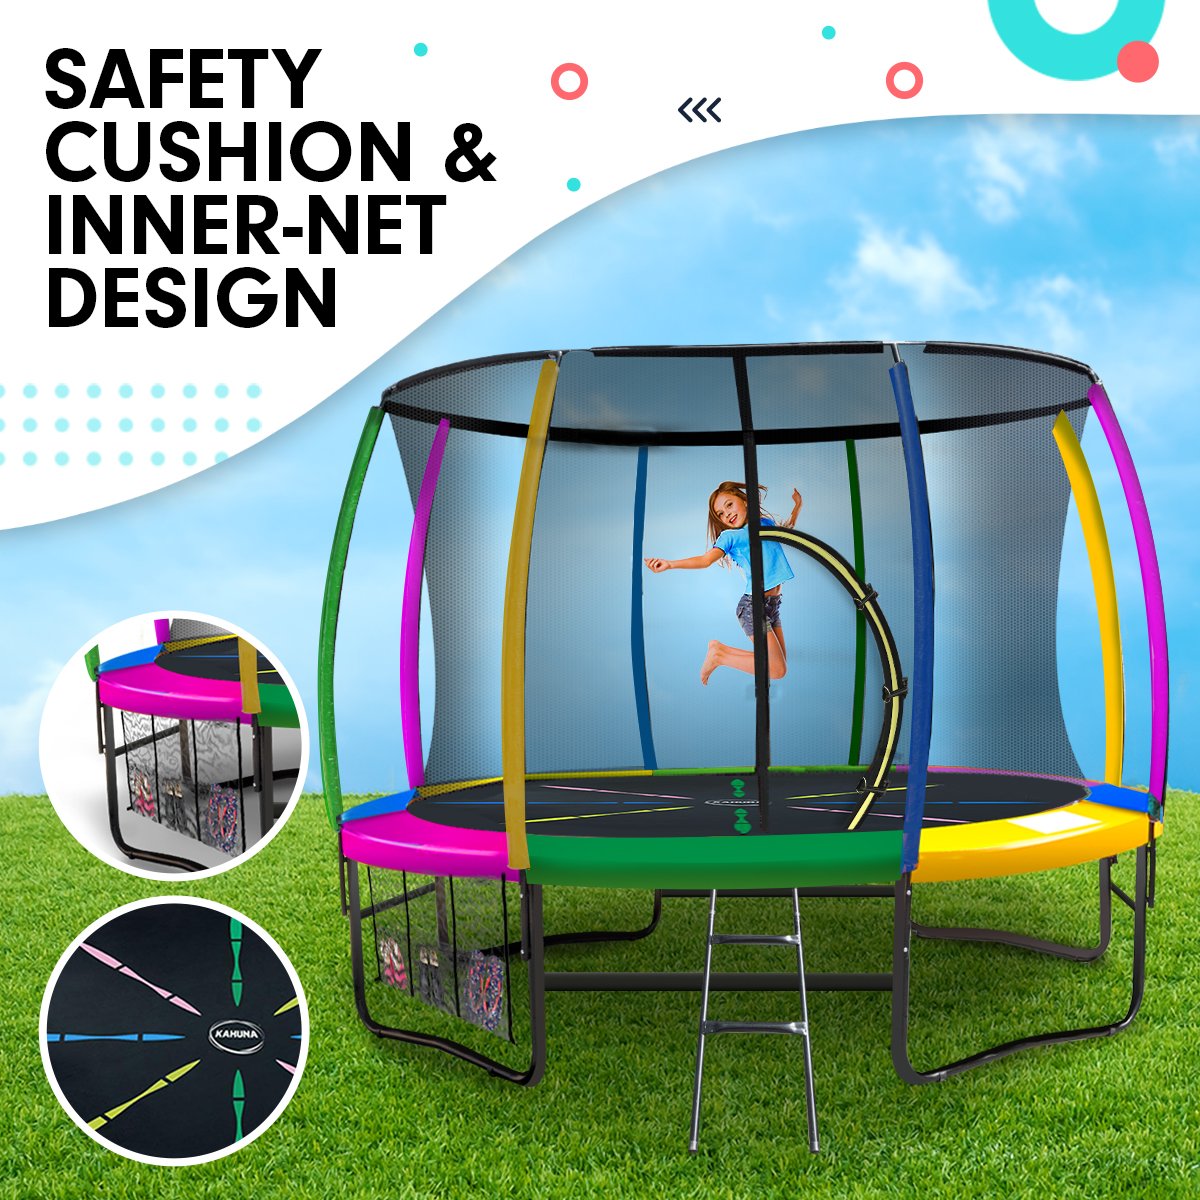 Kahuna 8ft Outdoor Rainbow Trampoline For Kids And Children Suited For Fitness Exercise Gymnastics With Safety Enclosure - SILBERSHELL